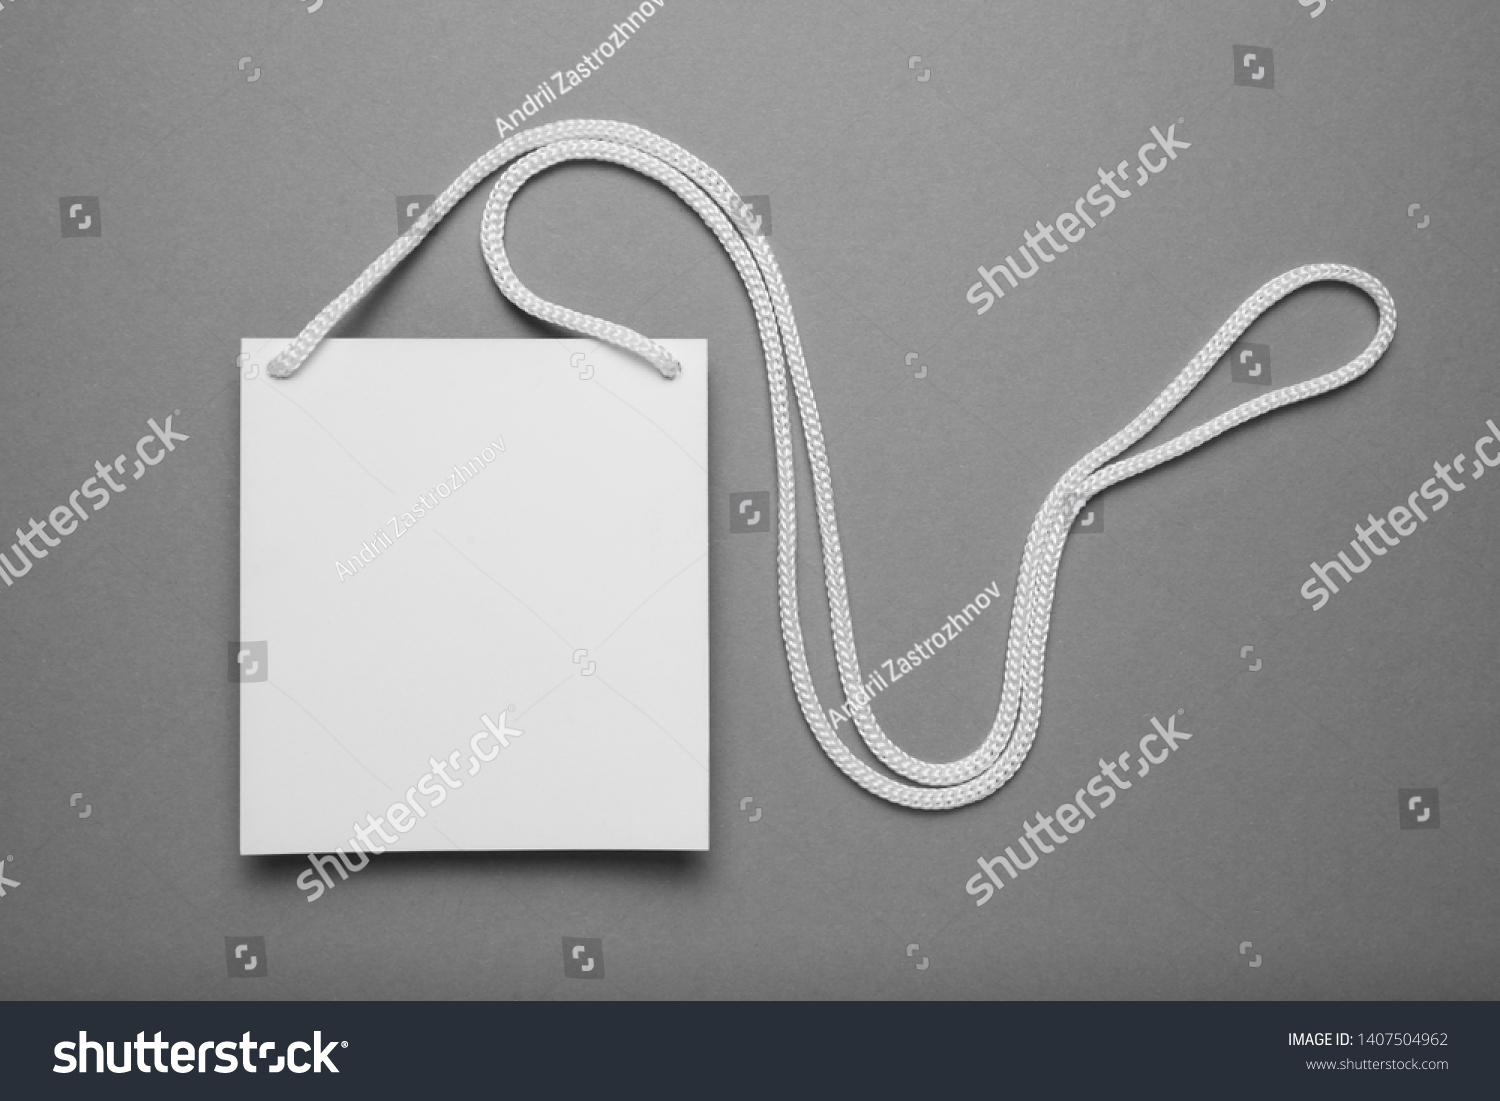 Name tag badge, isolated convention card blank on grey background. #1407504962